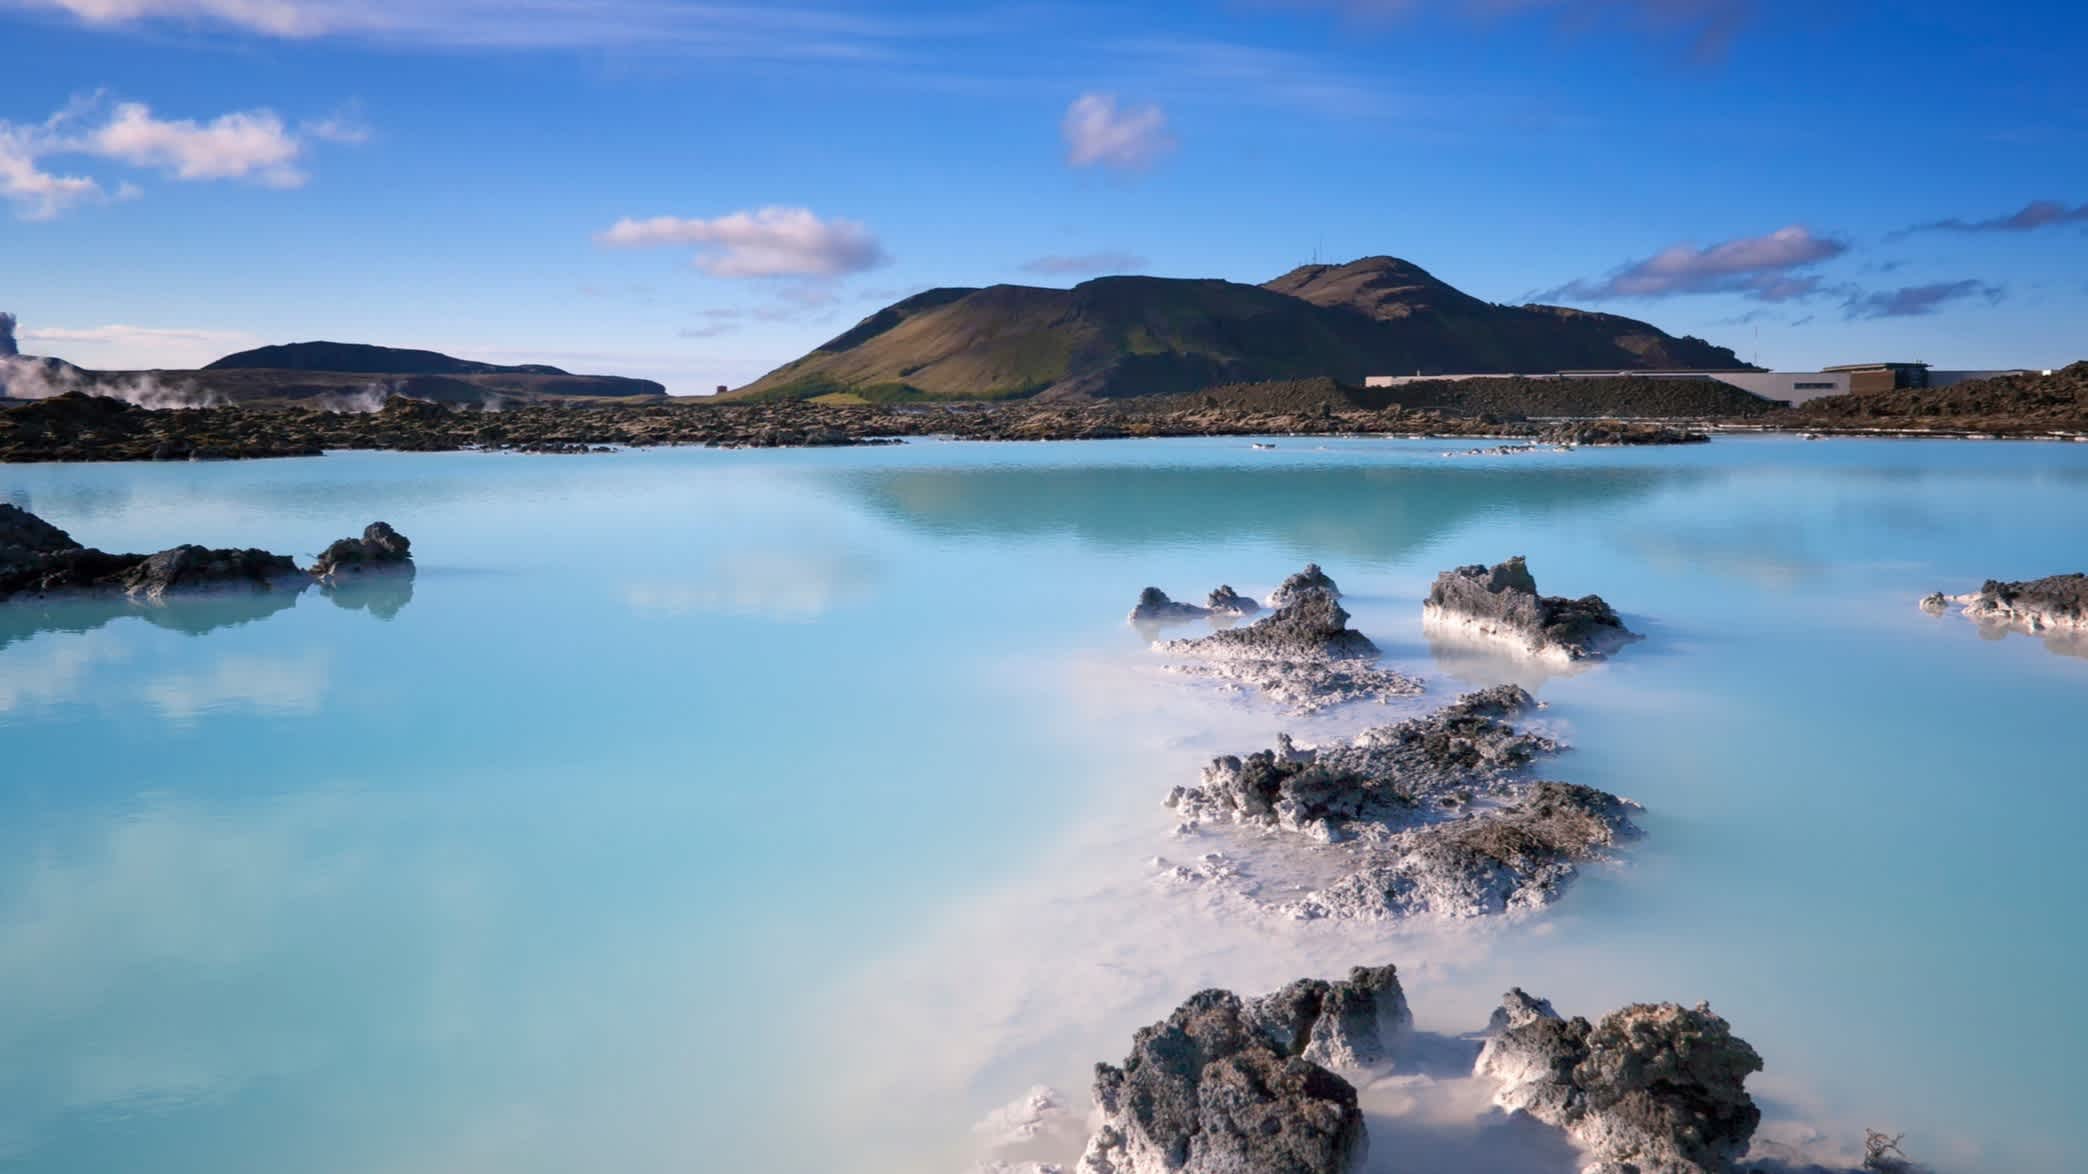 Enjoy the beautiful blue waters of the Blue Lagoon thermal spa in Iceland on an Iceland vacation package